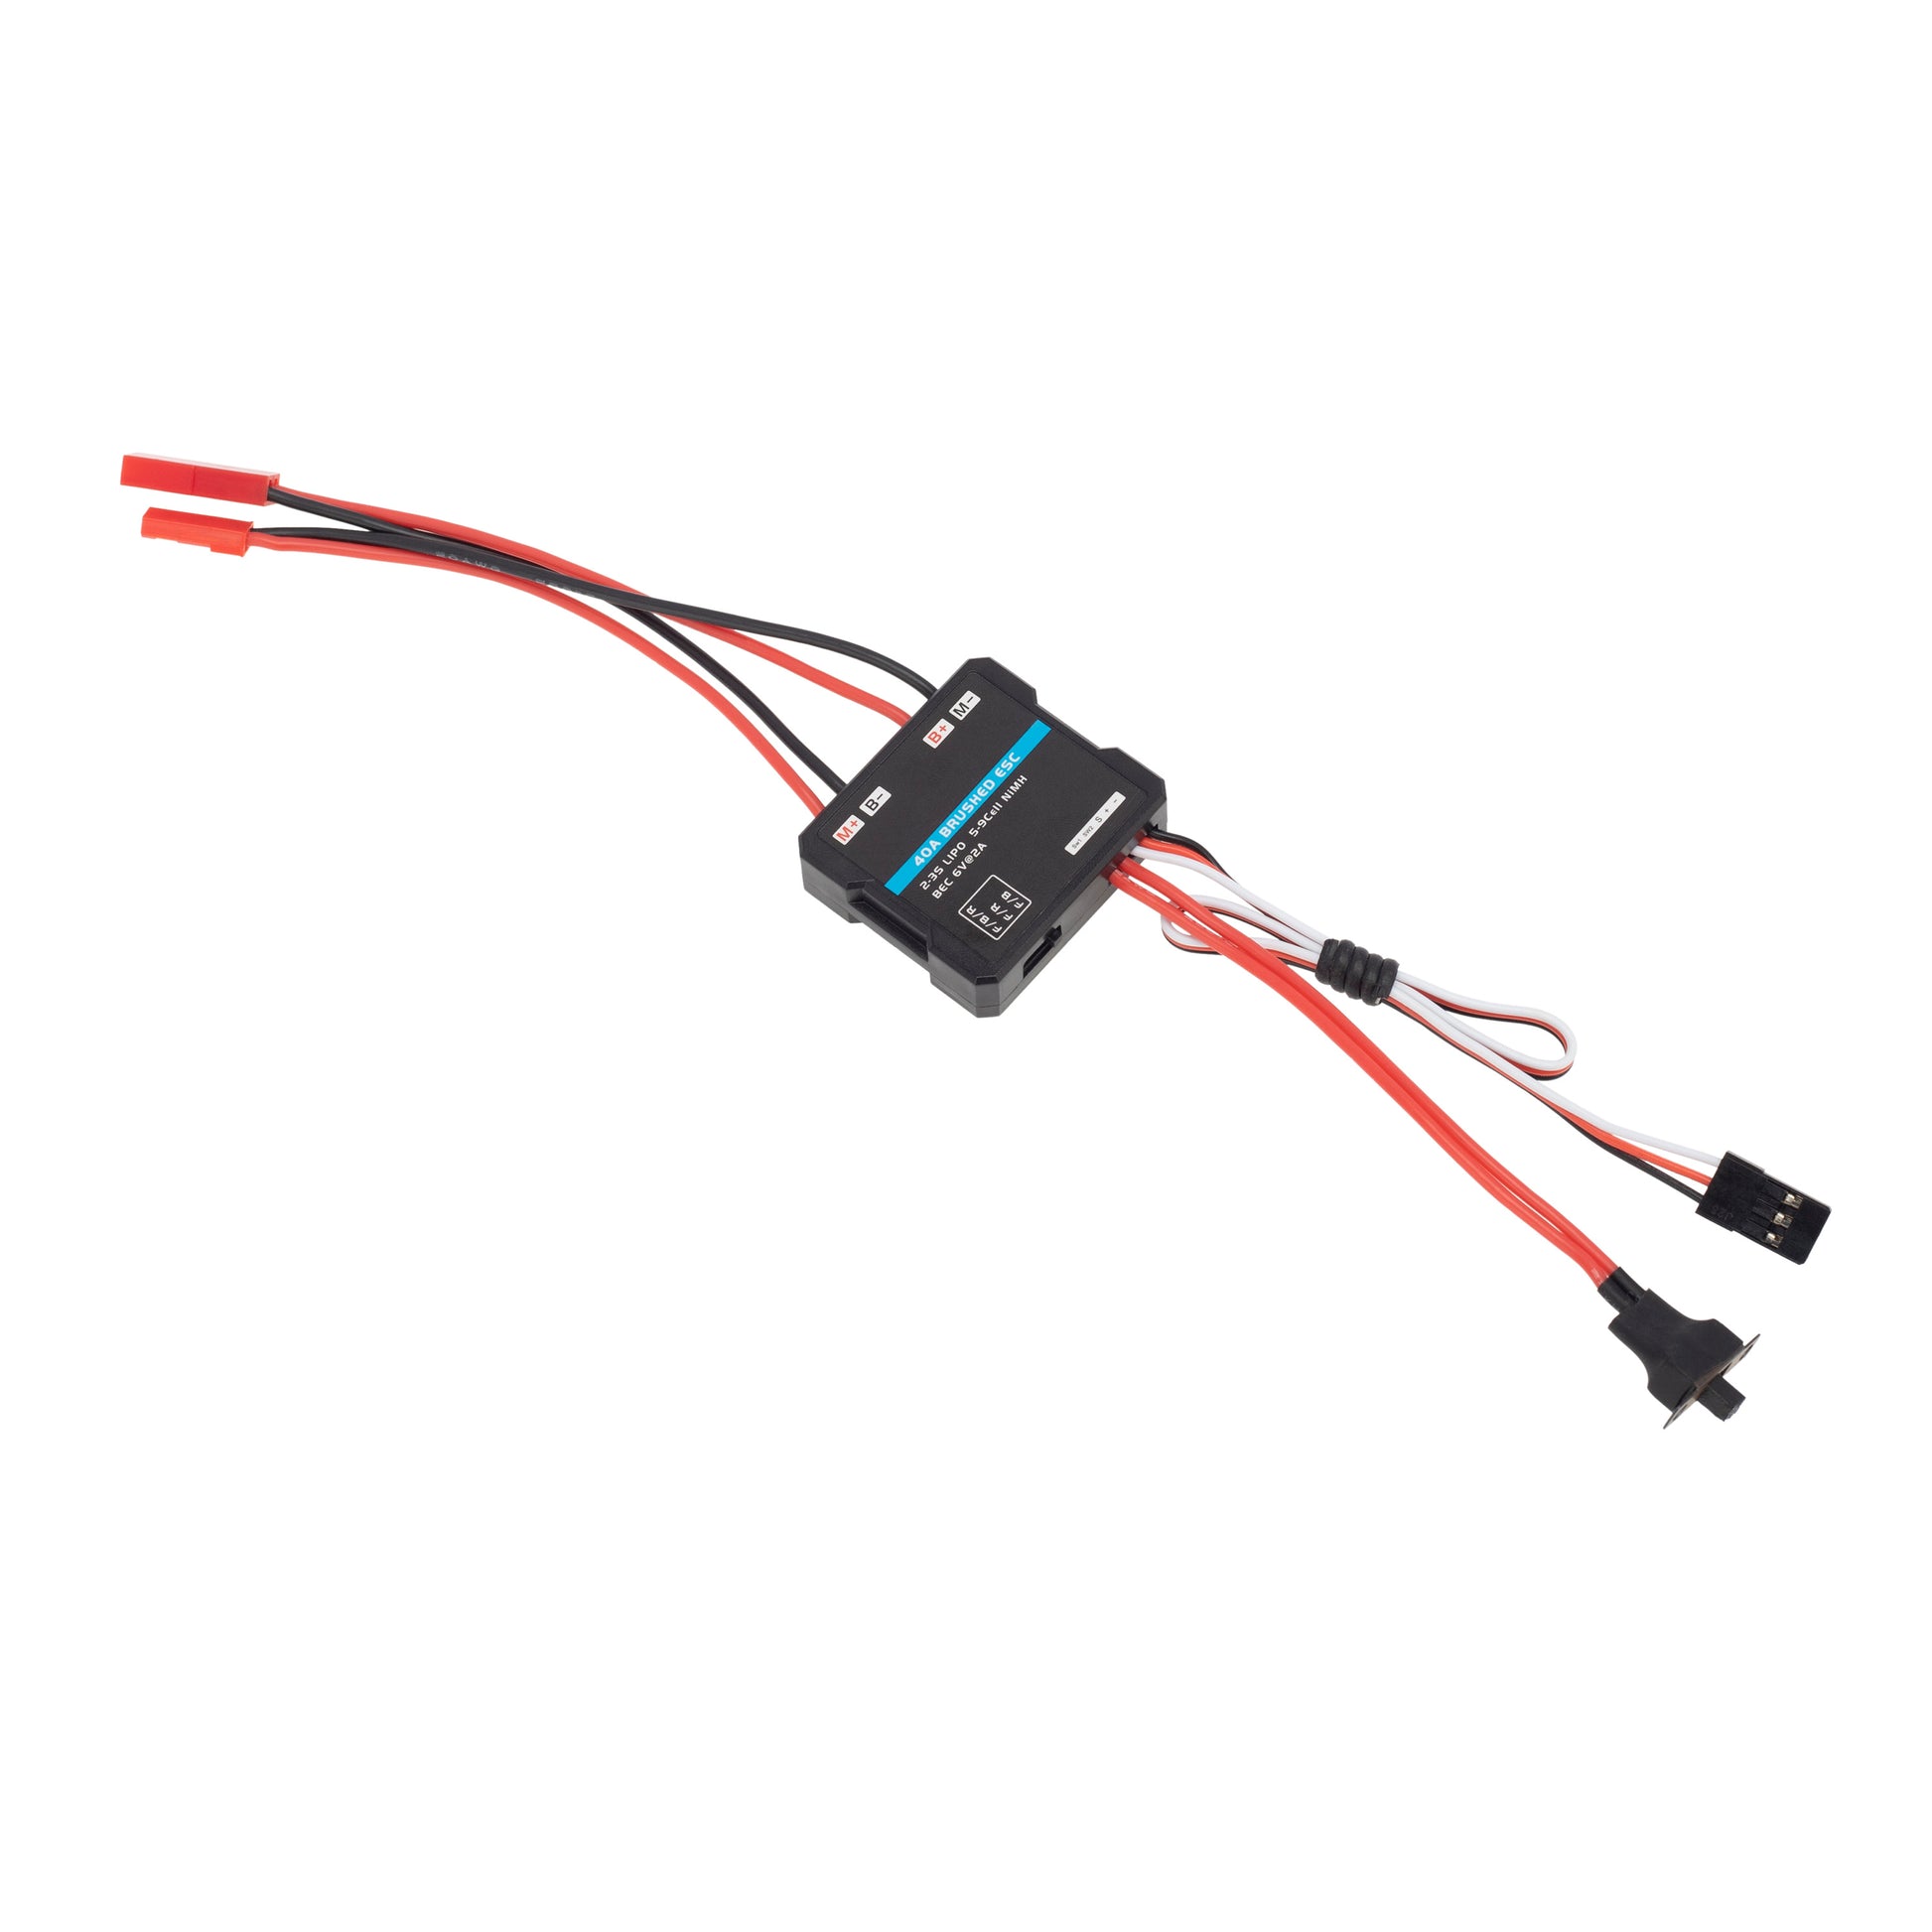 40A Brushed ESC for RC Car